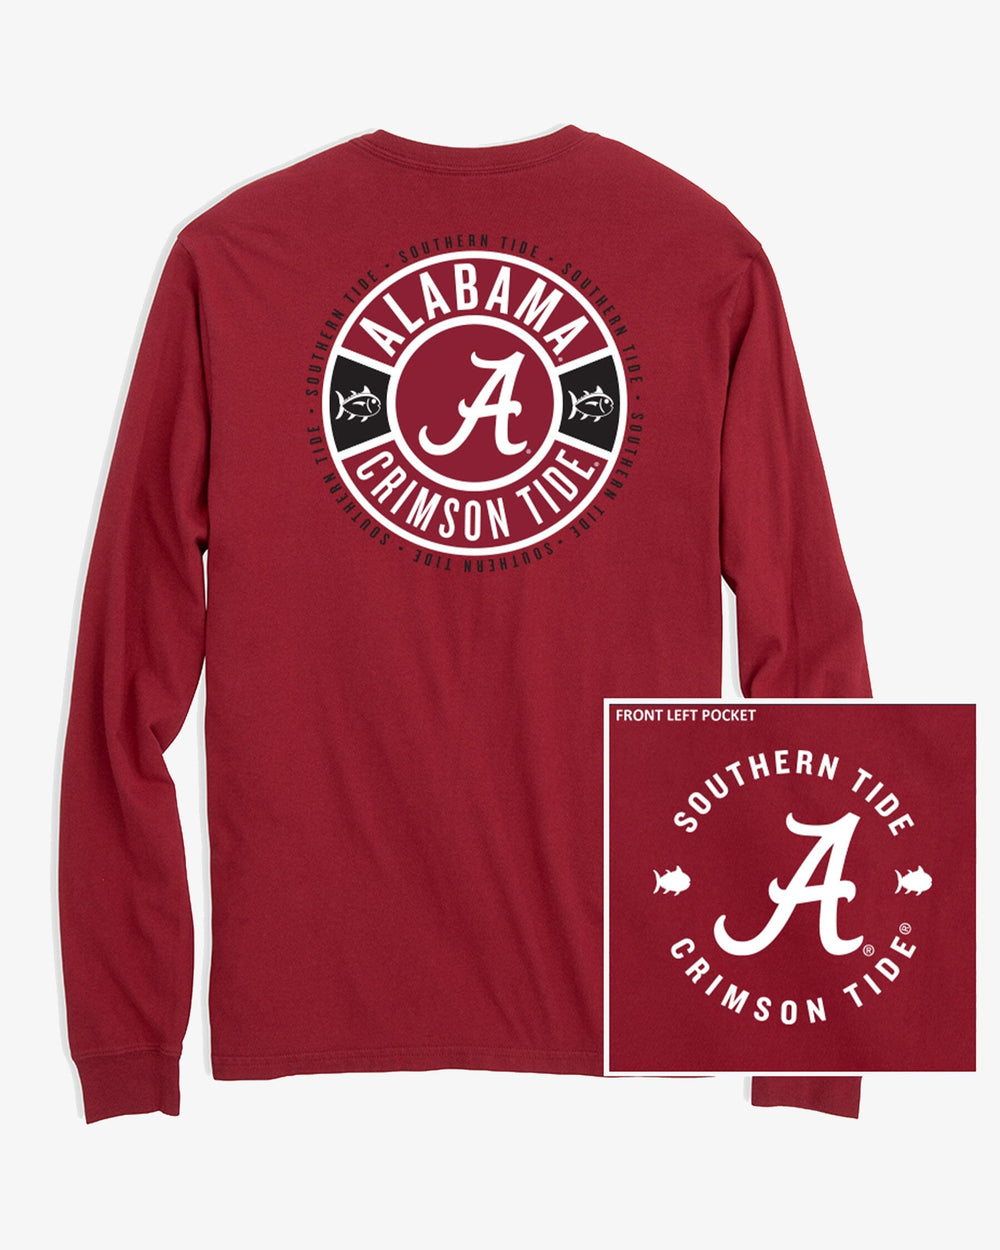 The front view of the Southern Tide Alabama Crimson Tide Ring Badge T-Shirt by Southern Tide - Crimson